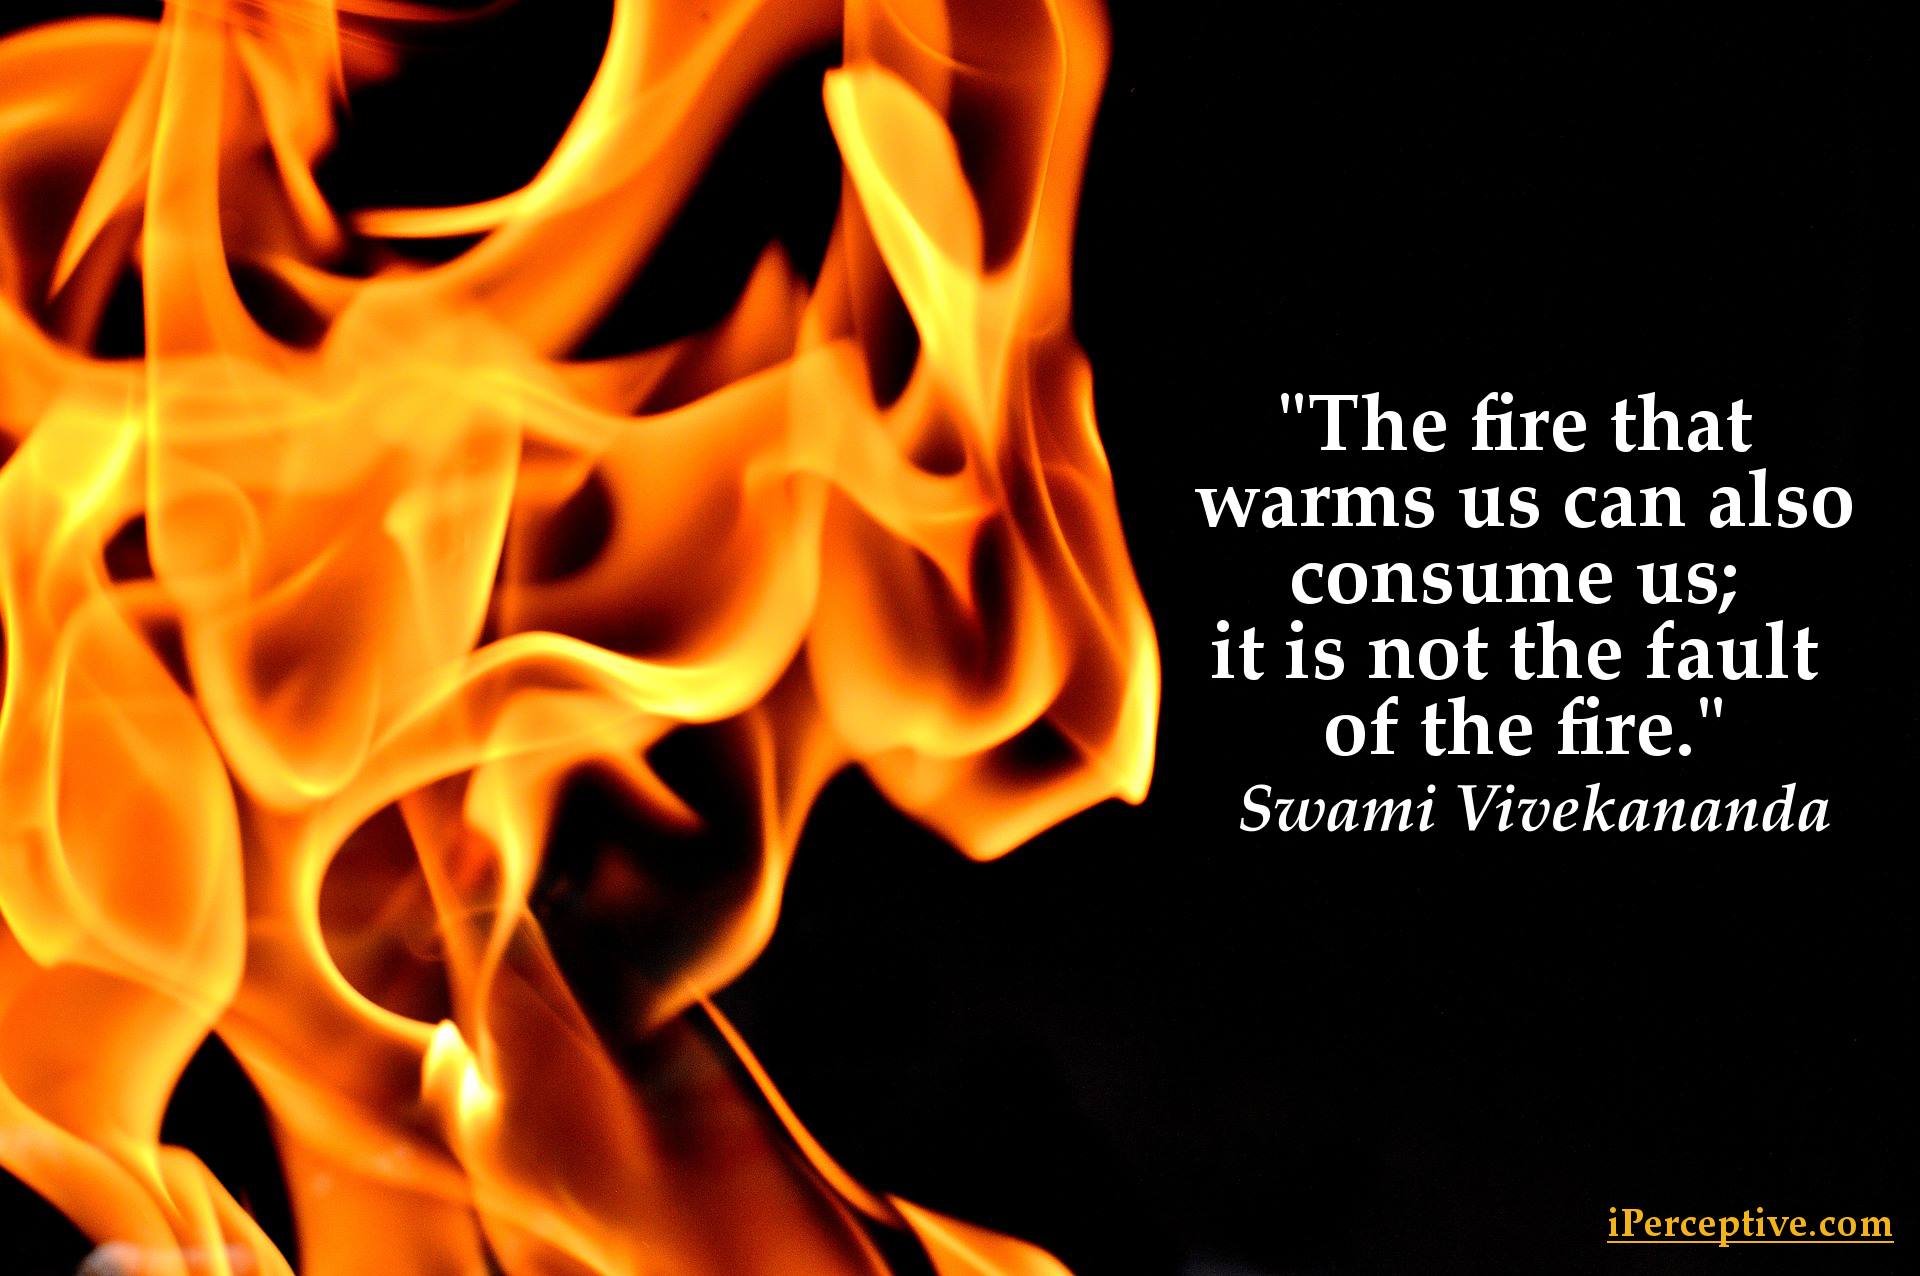 Swami Vivekananda Quote - The fire that warms us can also consume us...